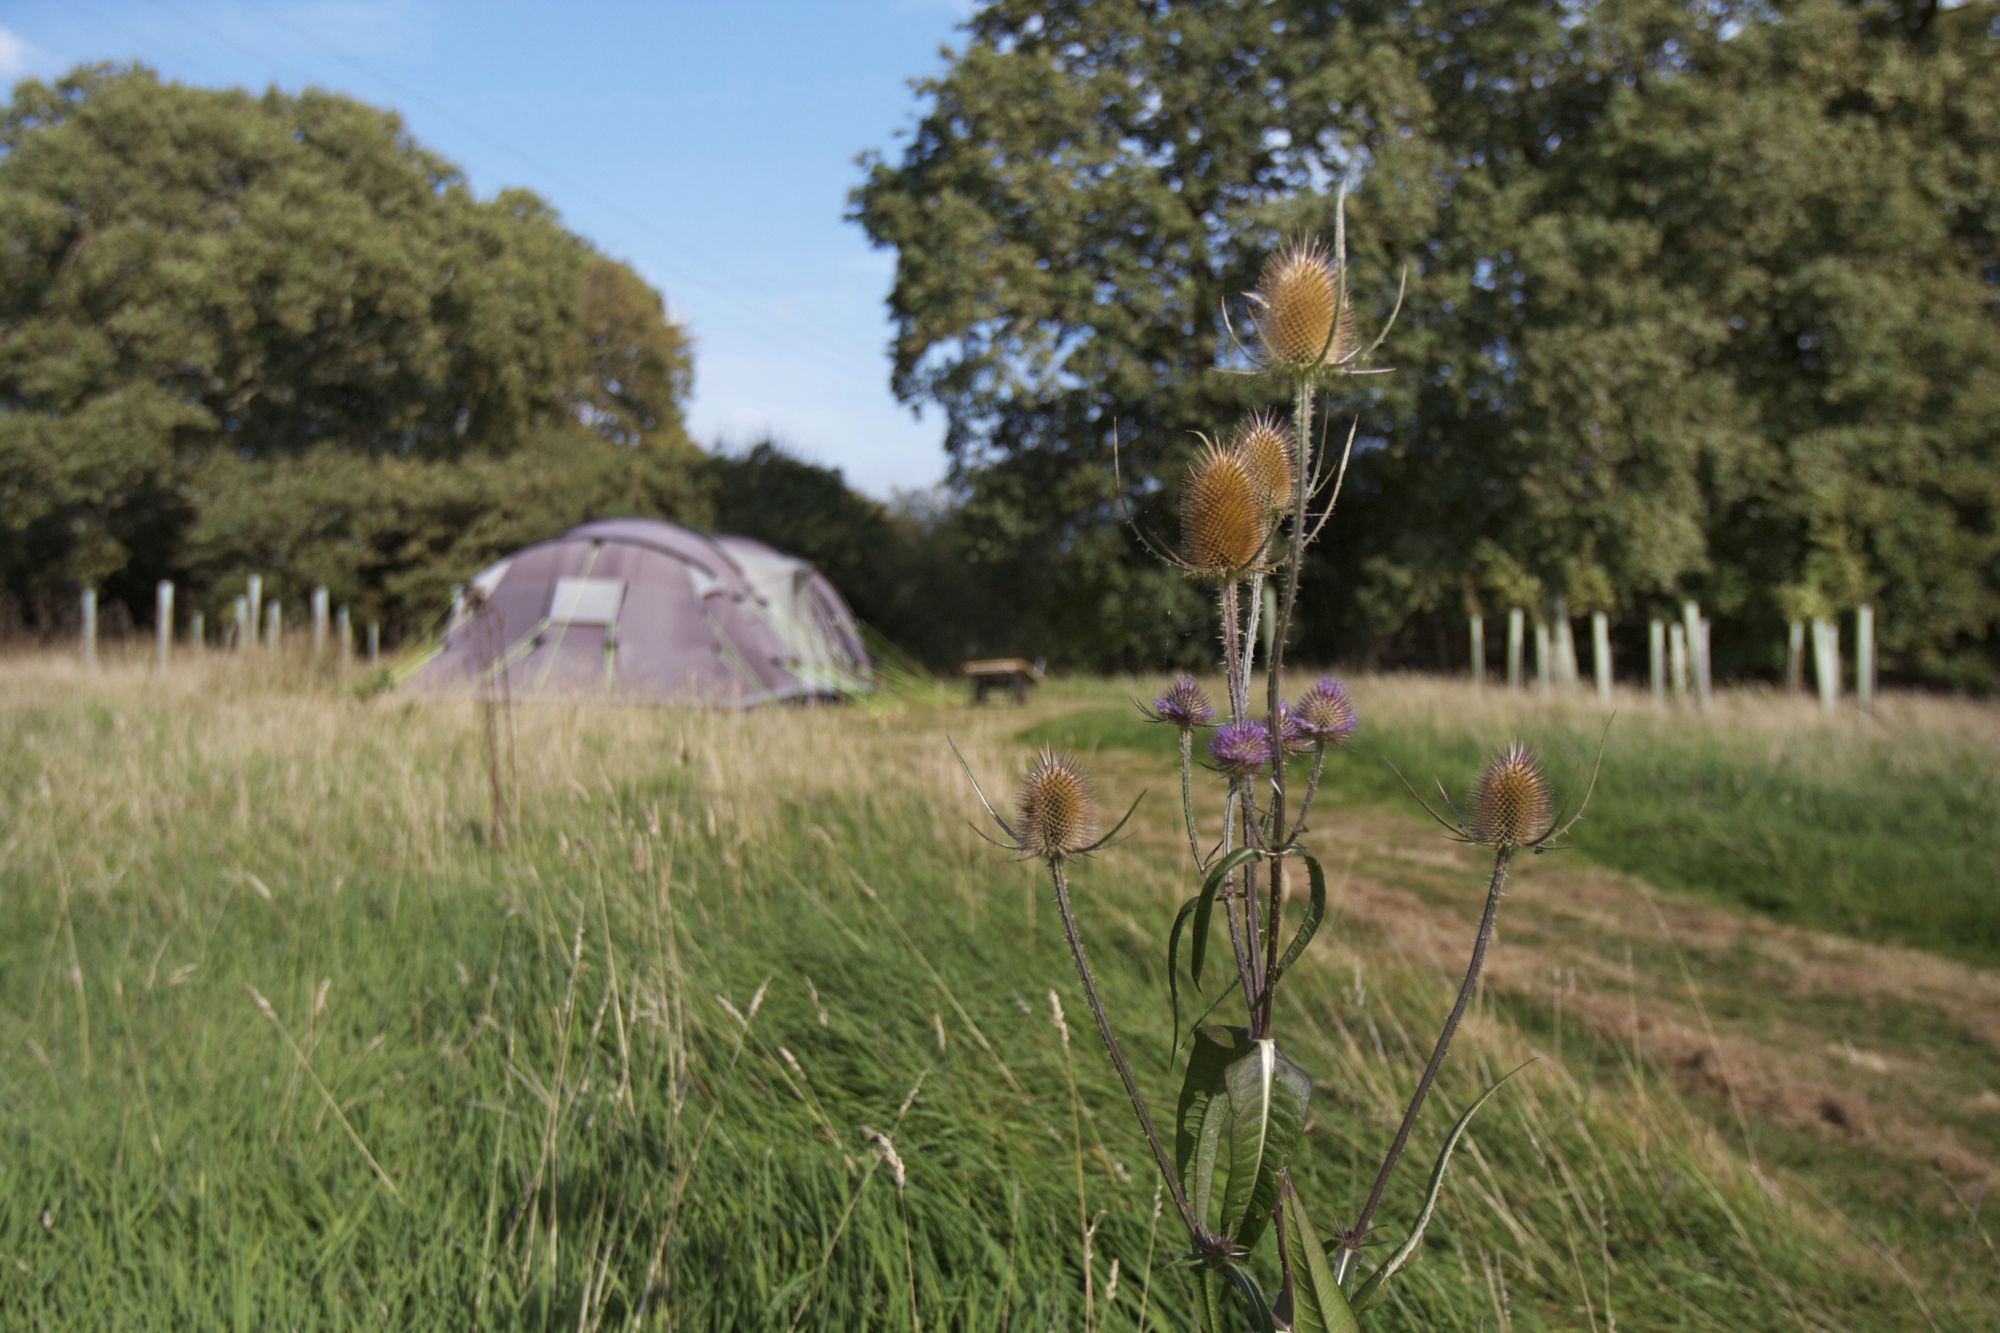 Campsites with wheelchair access & disabled camping facilities